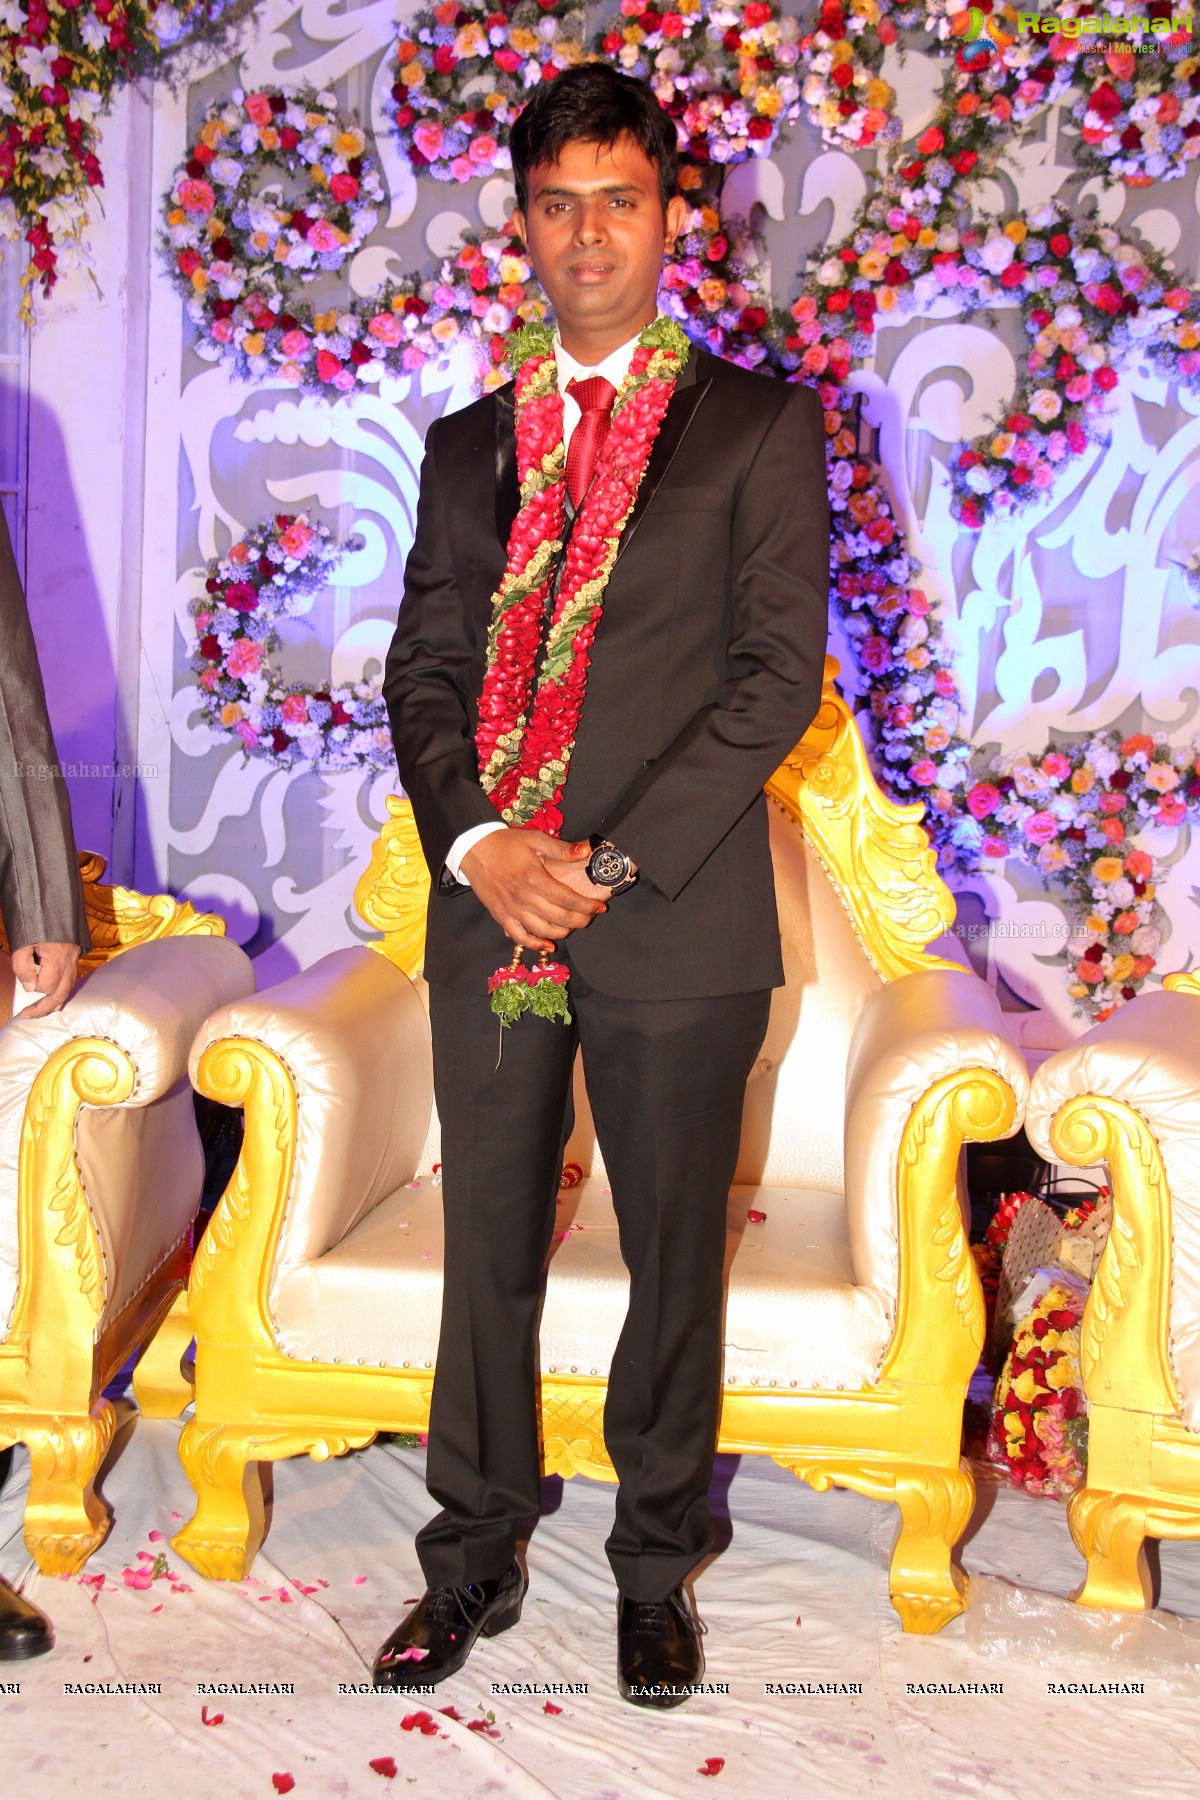 Grand Wedding Reception of Syed Wahed Ali